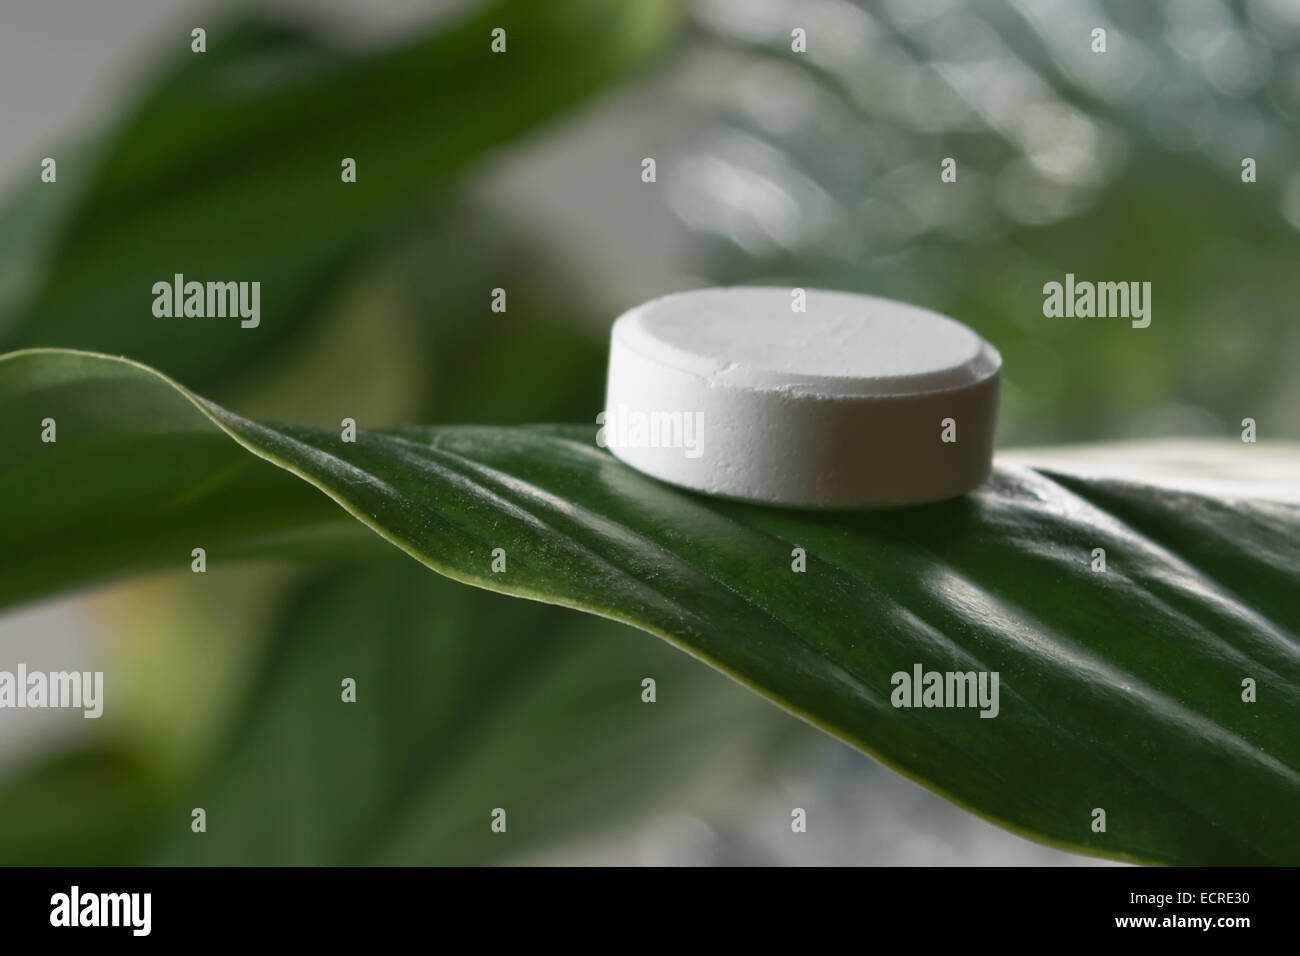 white pill lying on a green leaf Stock Photo